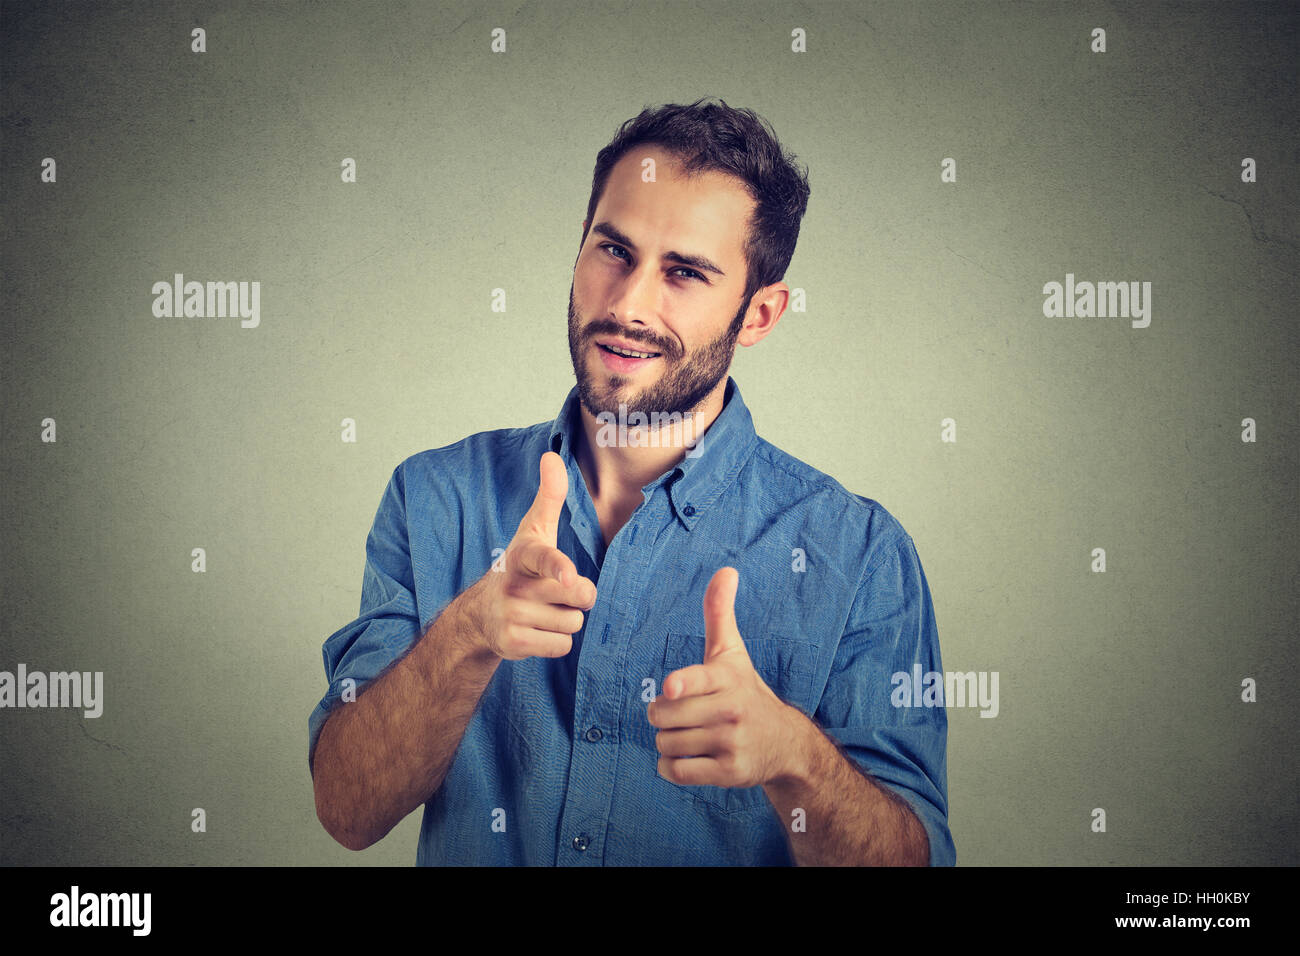 handsome young smiling man giving thumbs up pointing fingers at camera, picking you as friend isolated on gray background Stock Photo